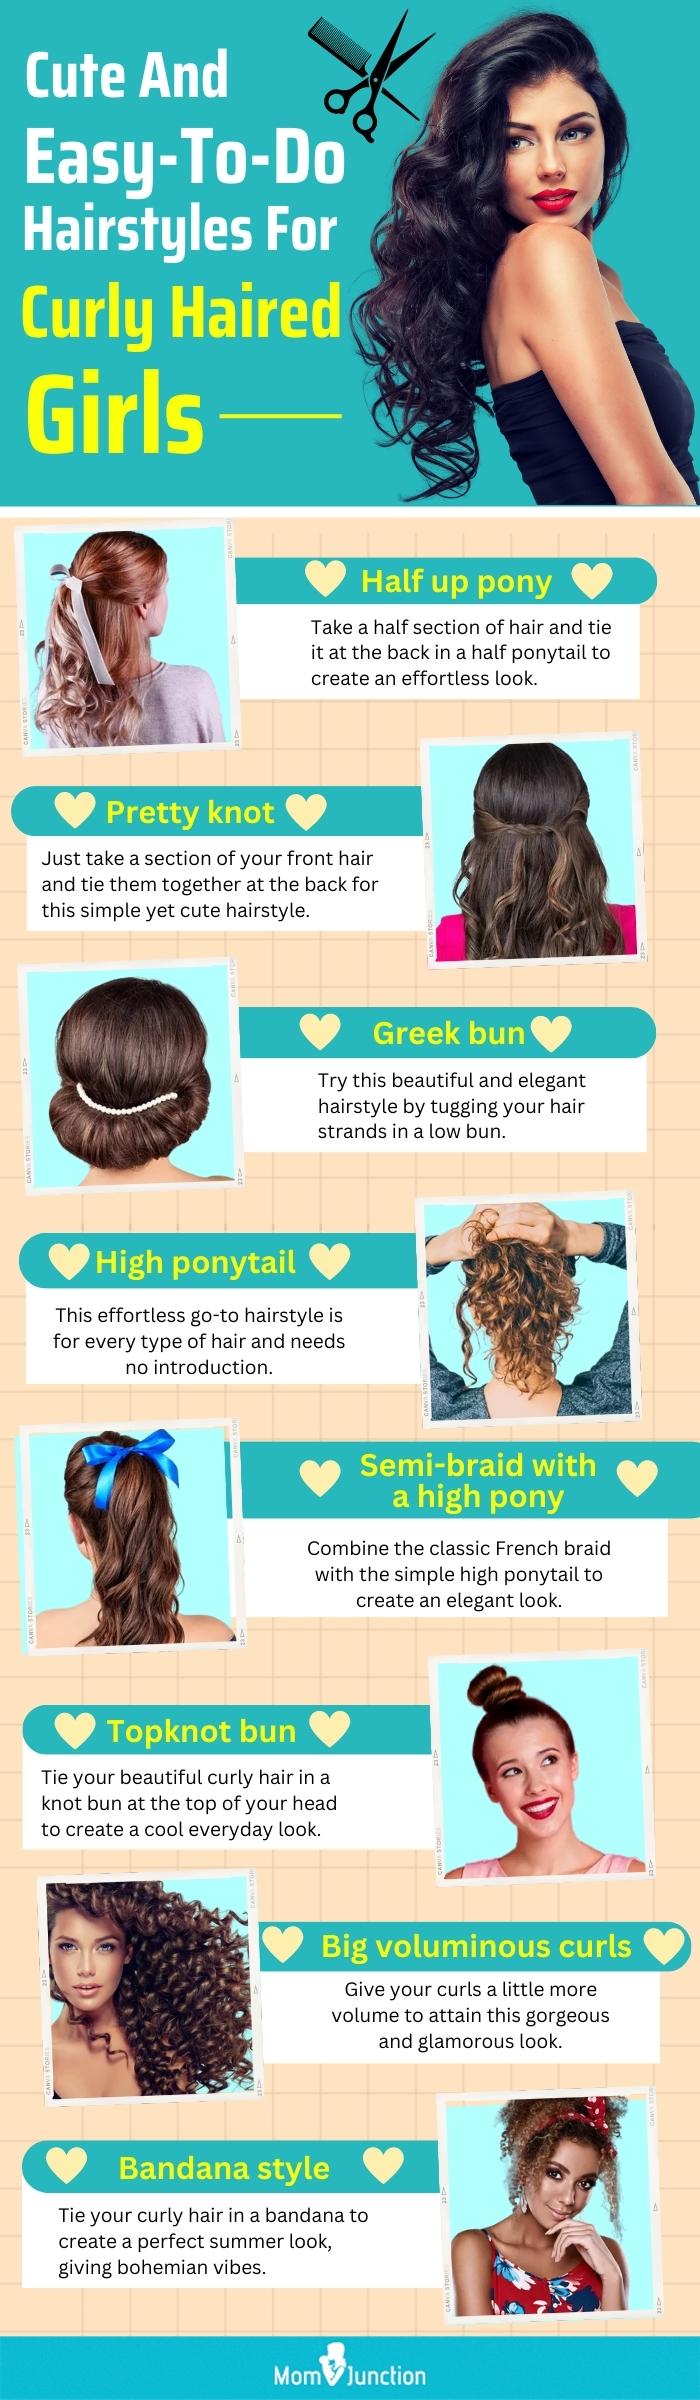 cute and easy to do hairstyles for curly haired girls (infographic)